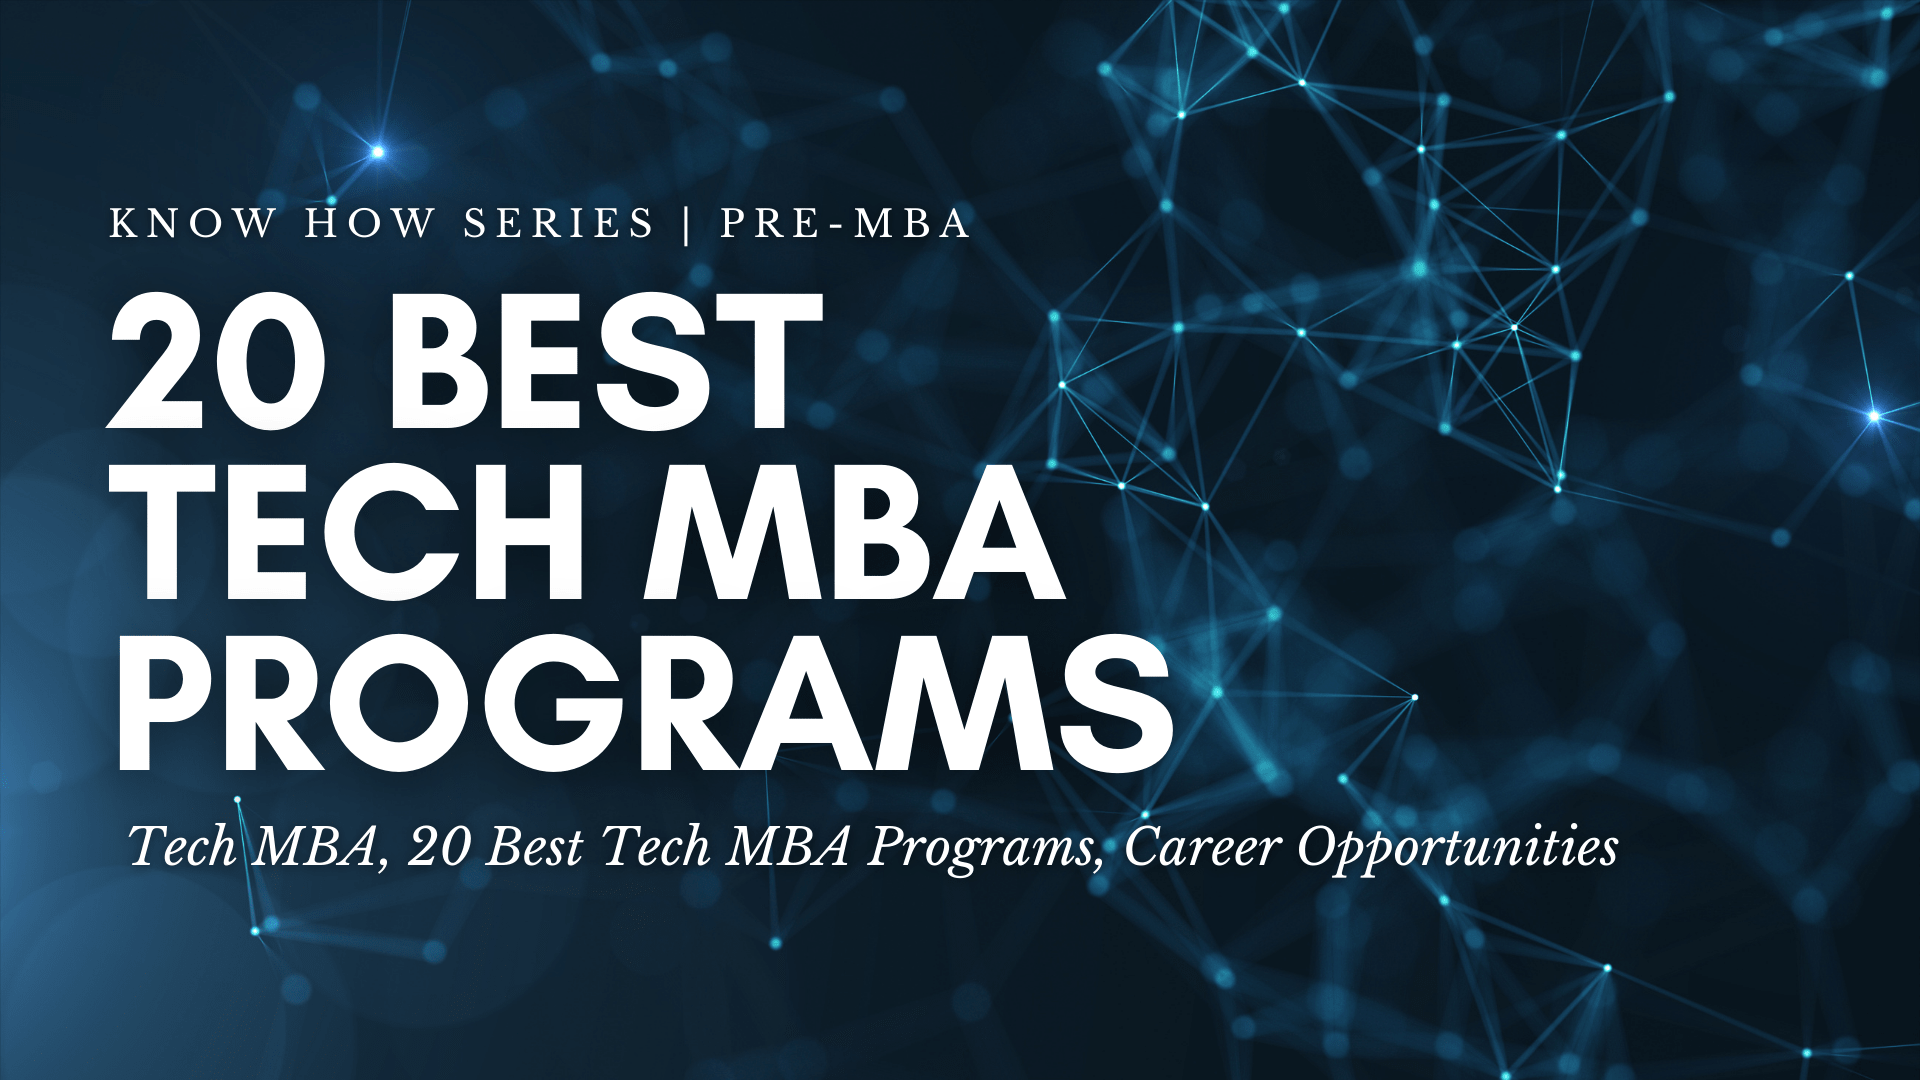 [Updated 2021] 20 Best Tech MBA Programs to Advance Your Career in Tech Industry